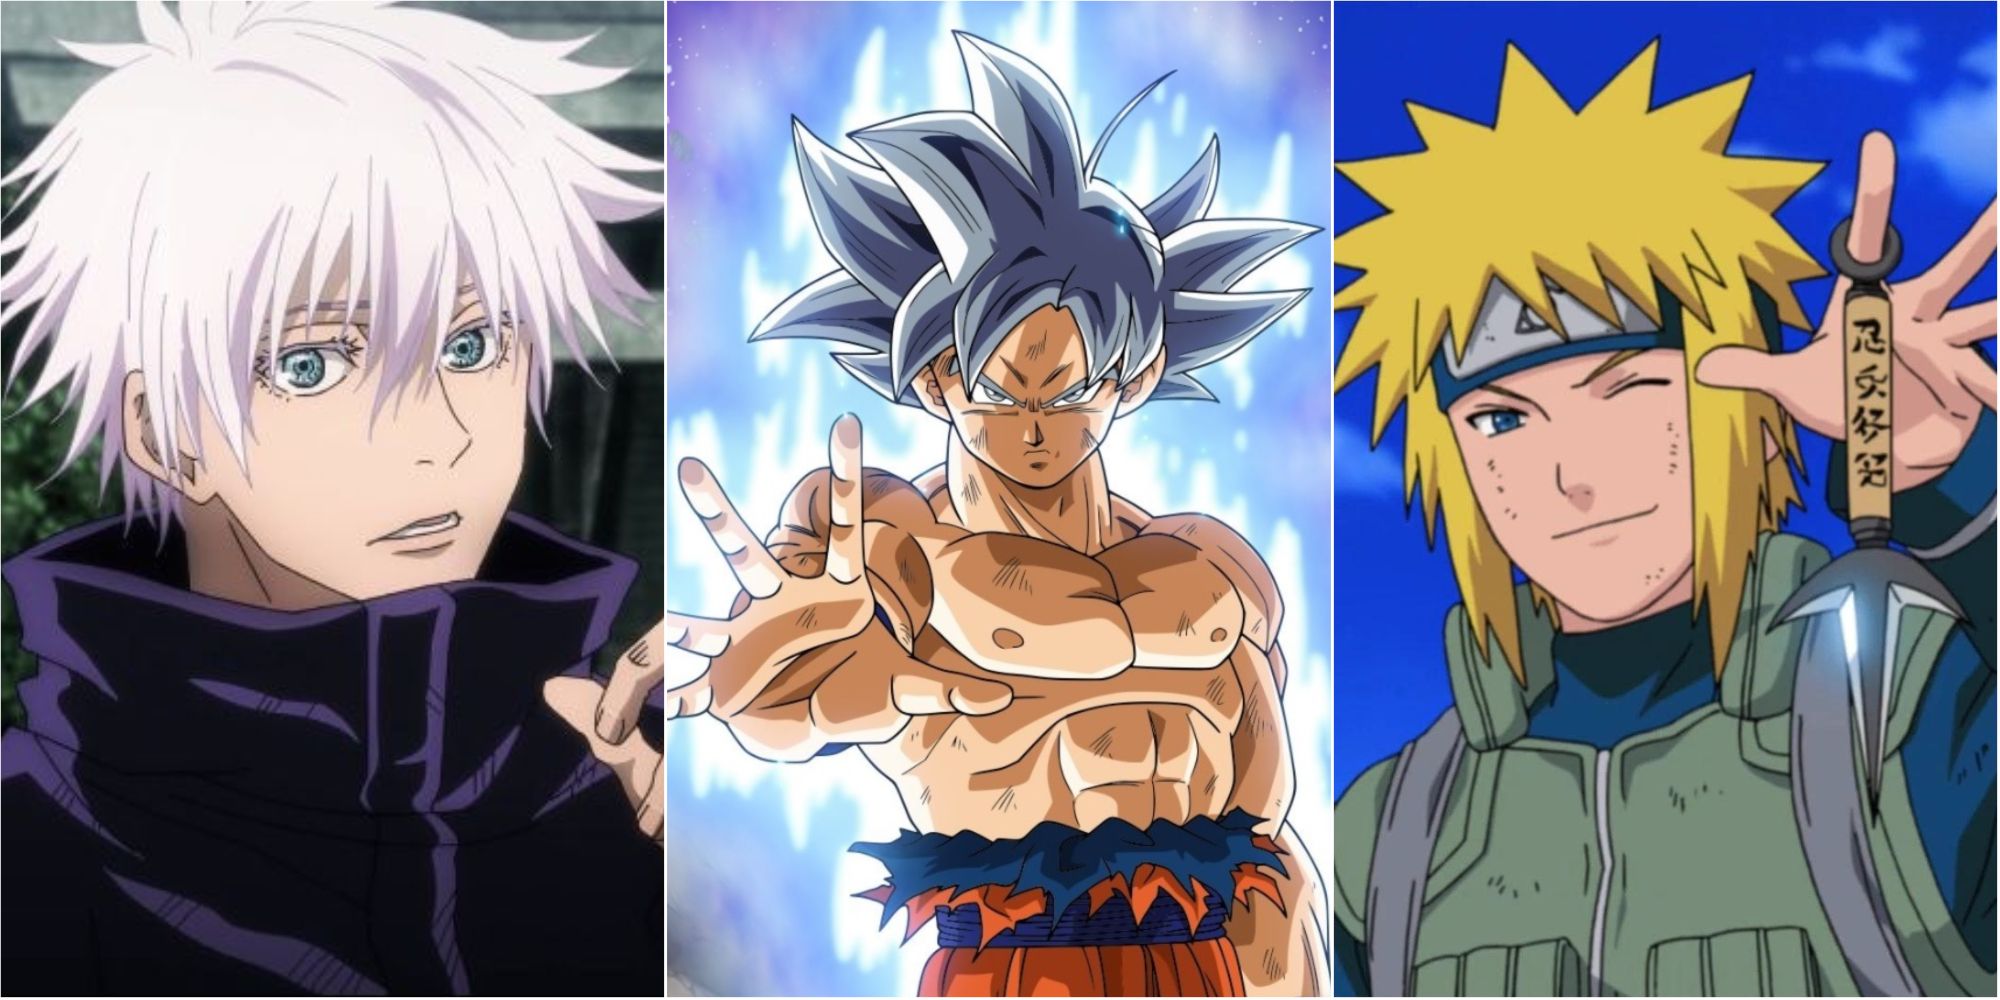 Fastest Anime Characters Comparison | Animation - Youtube Multiplier